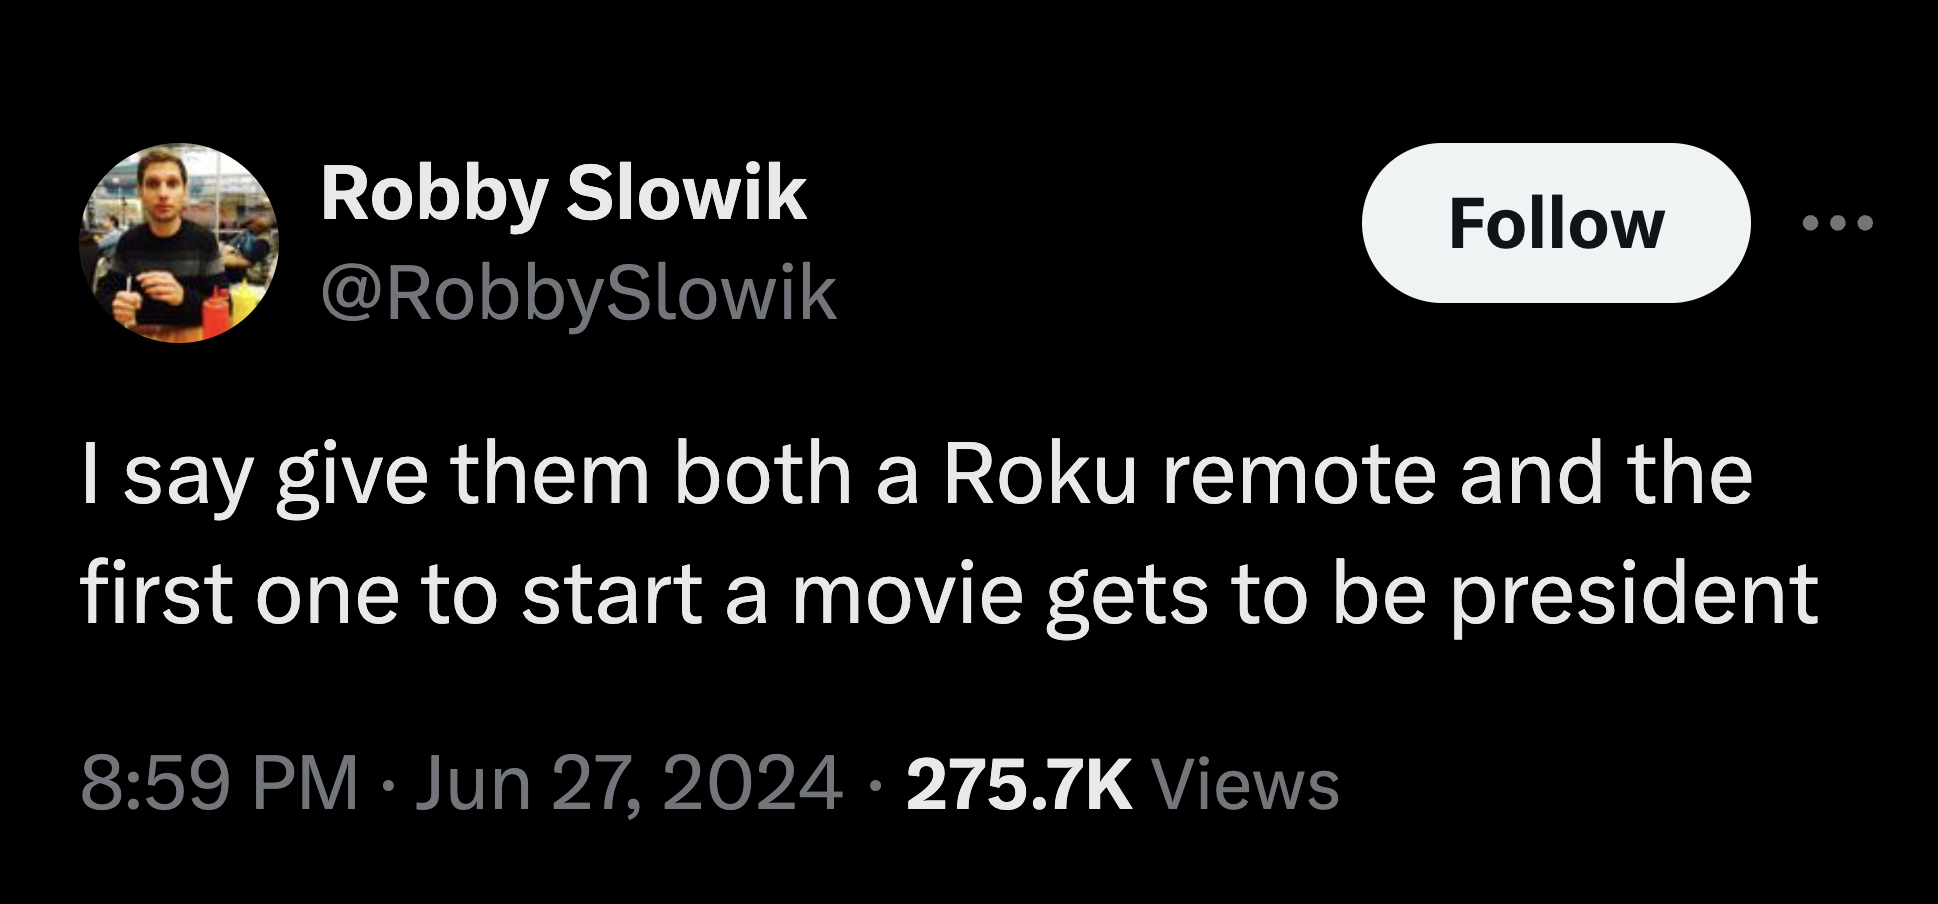 graphics - Robby Slowik I say give them both a Roku remote and the first one to start a movie gets to be president Views